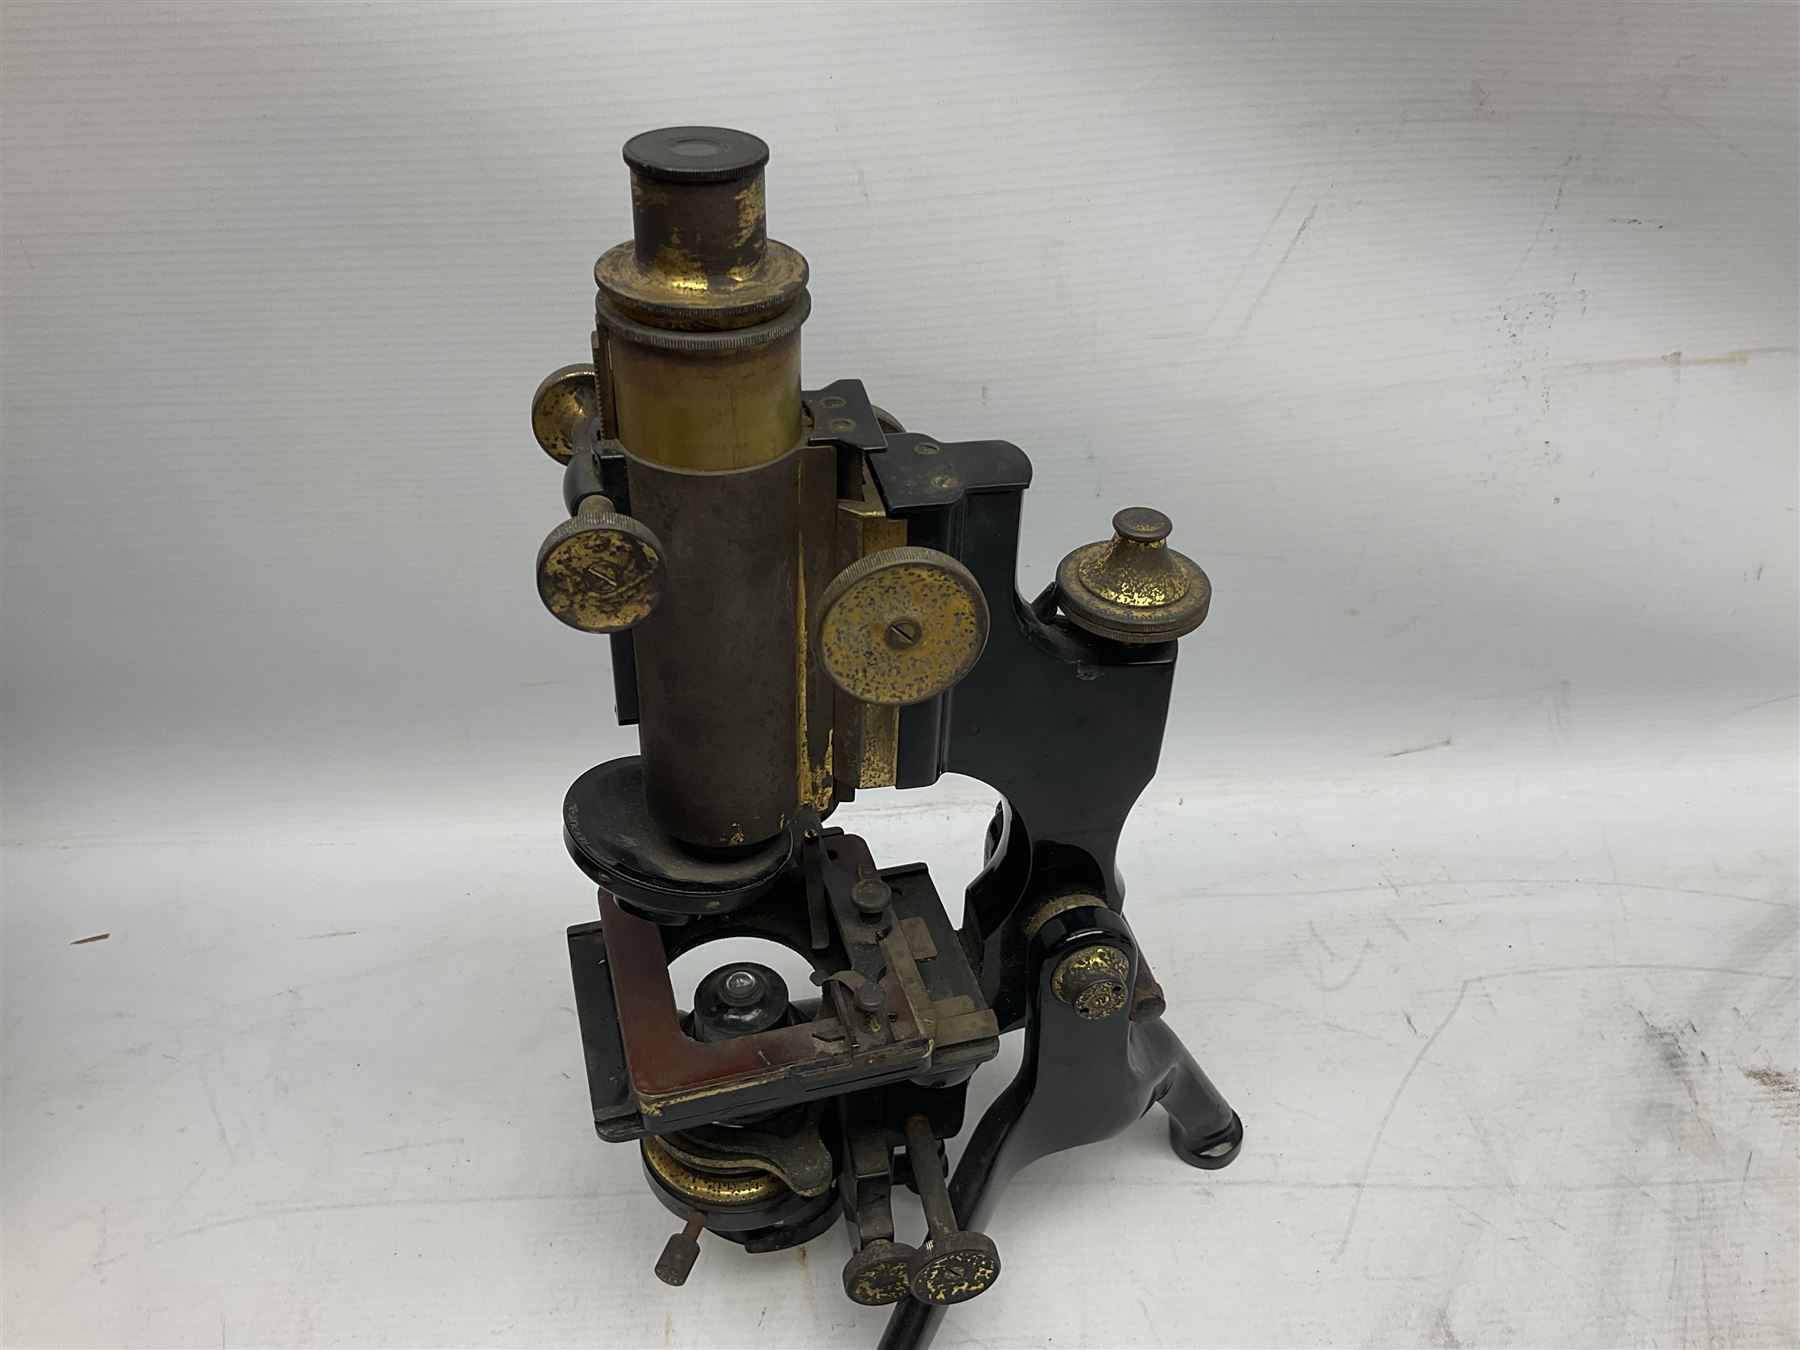 19th century brass and black japanned monocular microscope by W. Watson & Sons Ltd. 313 High Holborn - Image 7 of 15